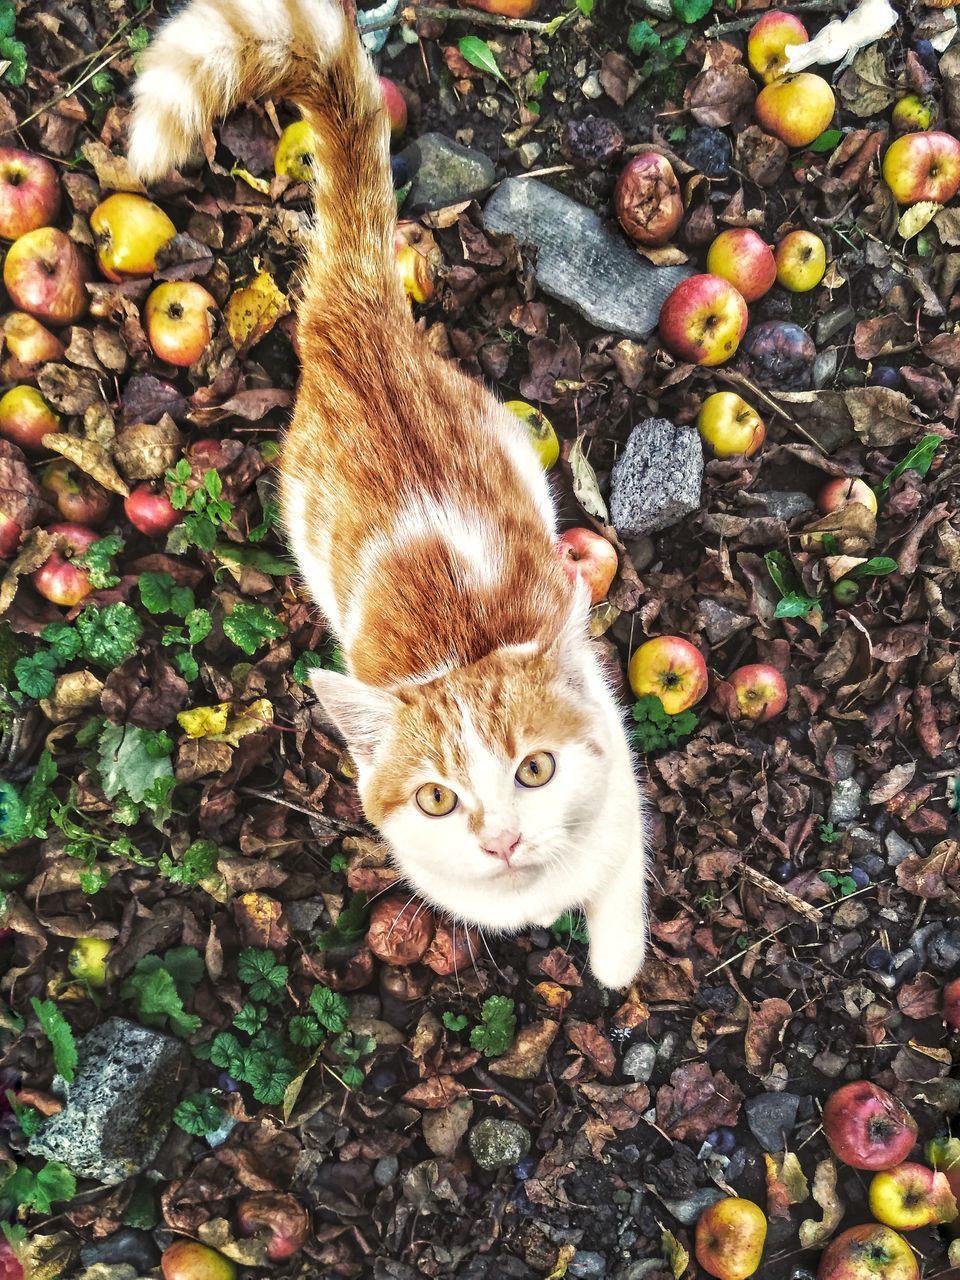 domestic cat, animal themes, high angle view, one animal, looking at camera, pets, domestic animals, day, feline, leaf, no people, portrait, outdoors, mammal, nature, ginger cat, kitten